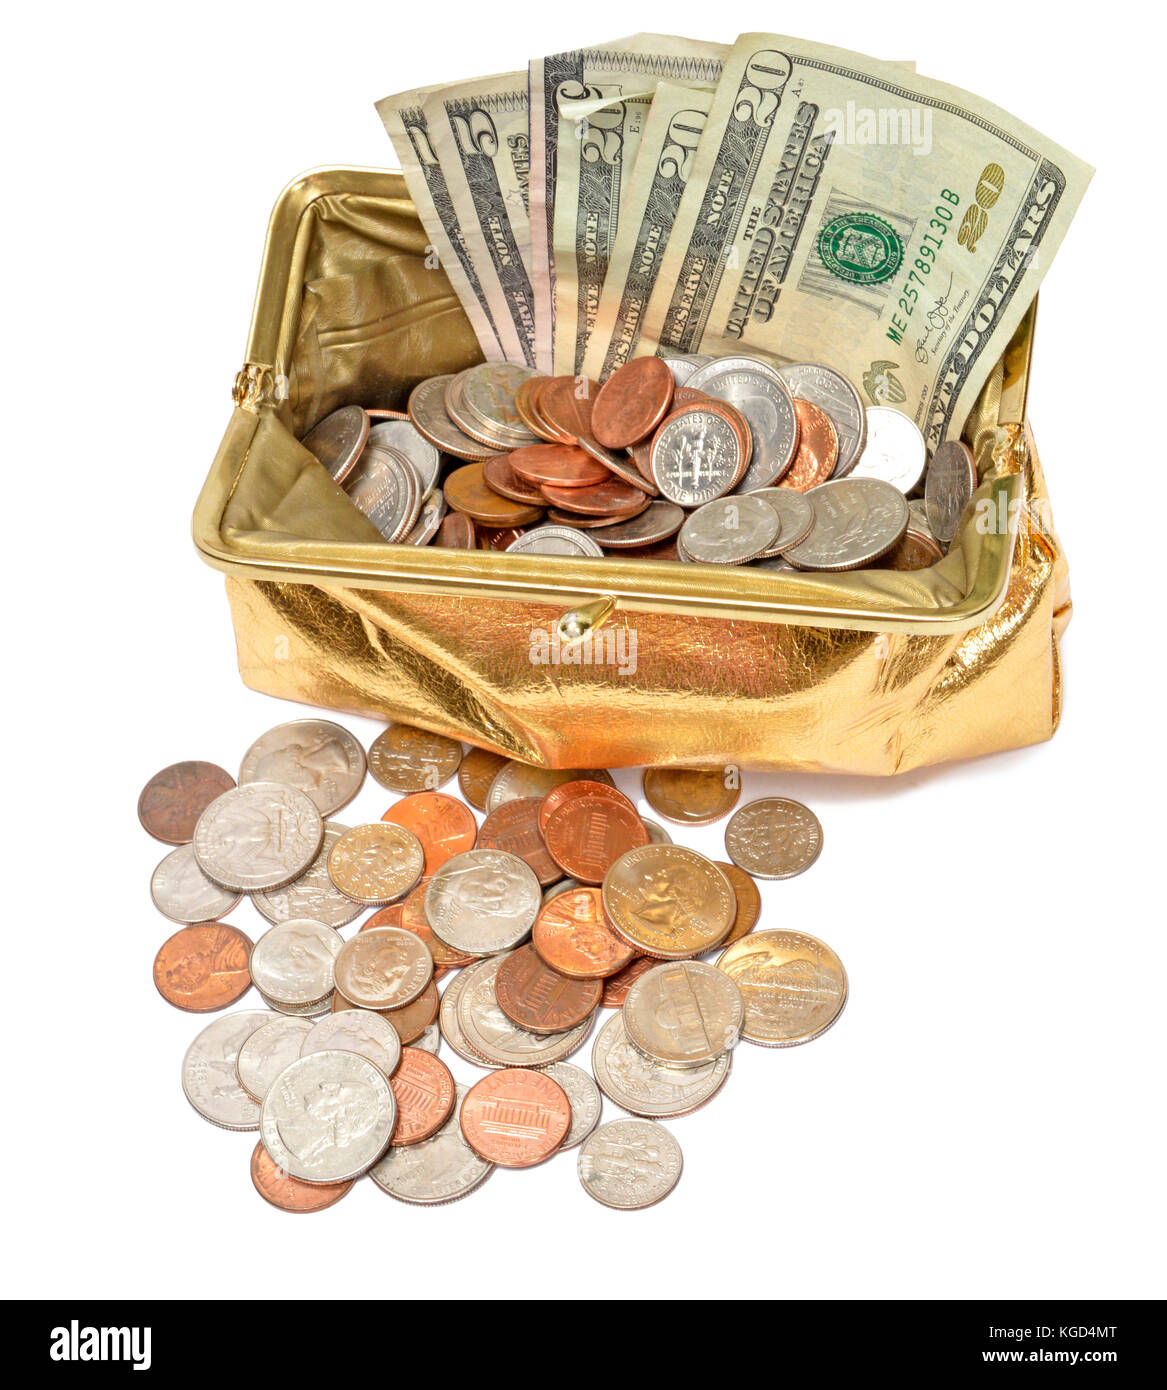 Vertical shot looking down on a gold metallic coin purse filled with five and twenty dollar bills and coins.  There are also coins in front. Stock Photo